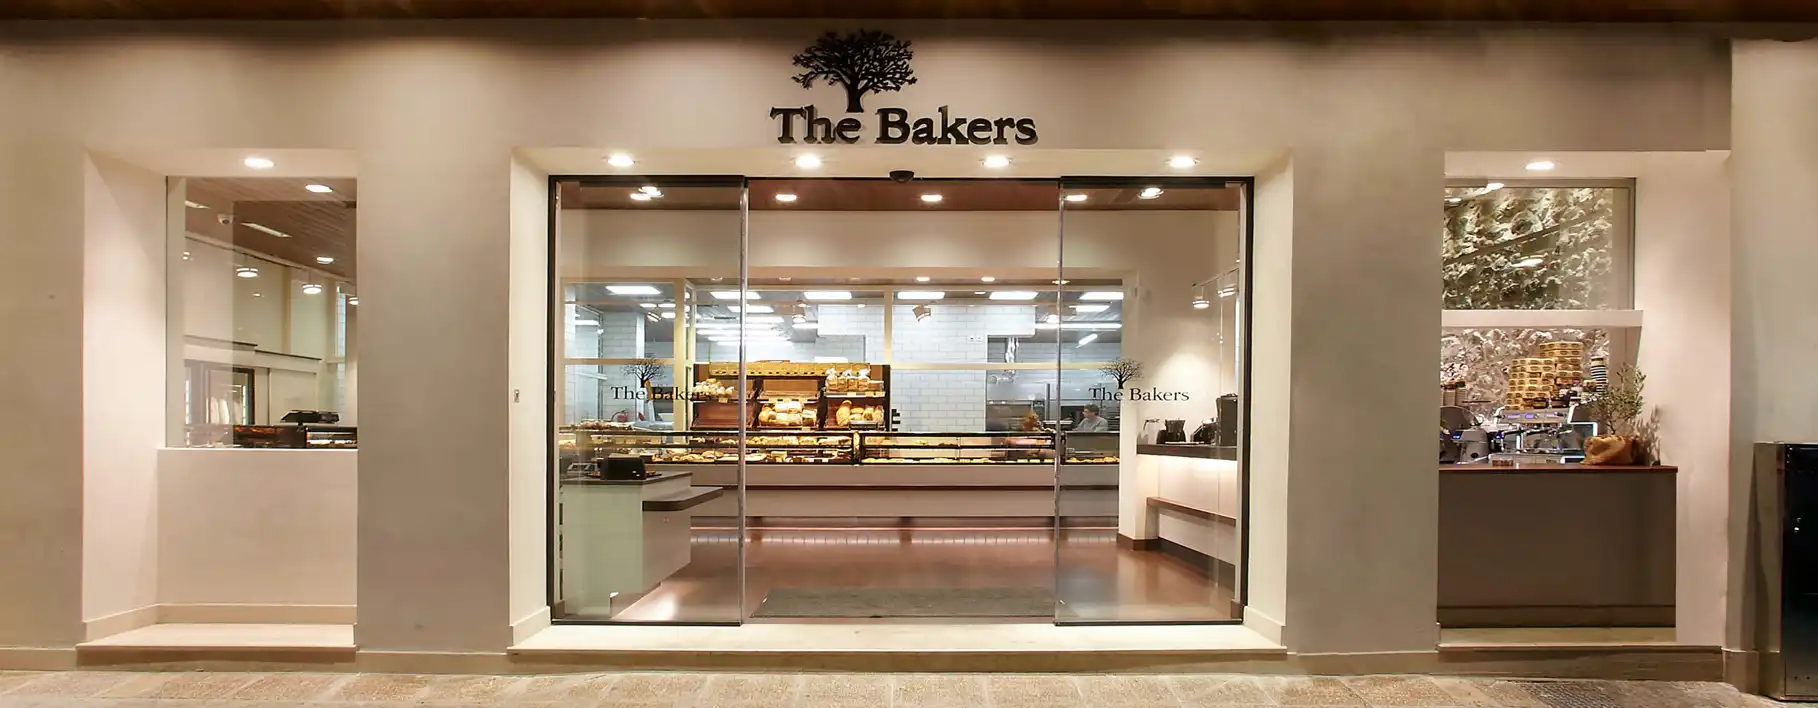 THE BAKERS